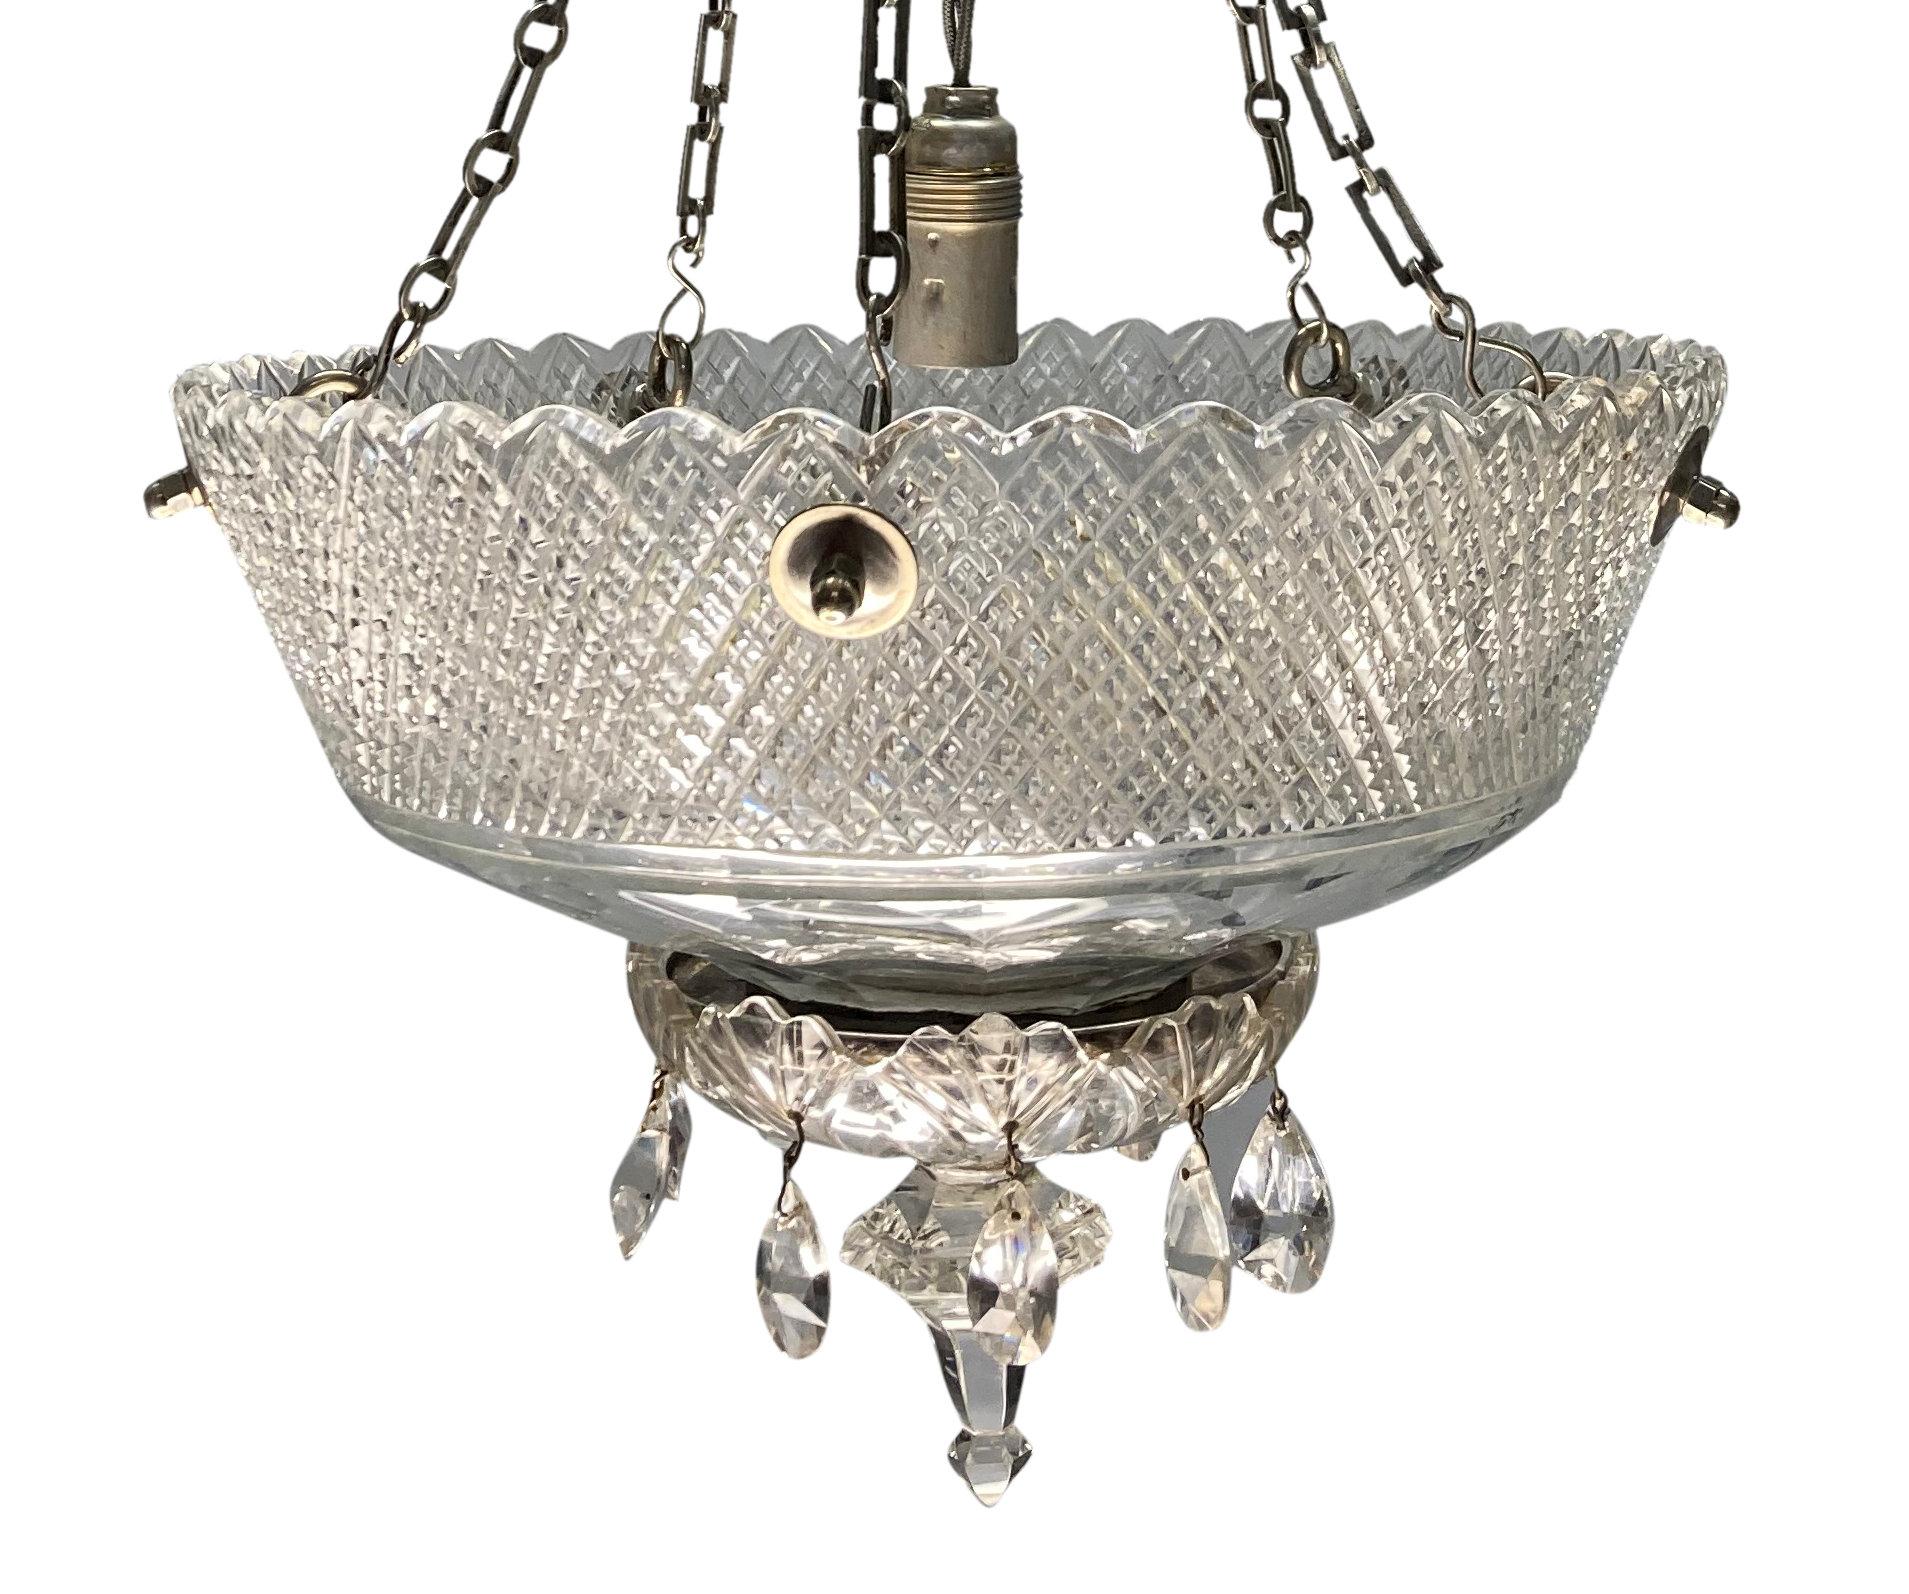 A fine English Edwardian cut glass dish light, with silver plated bronze chains and fittings.